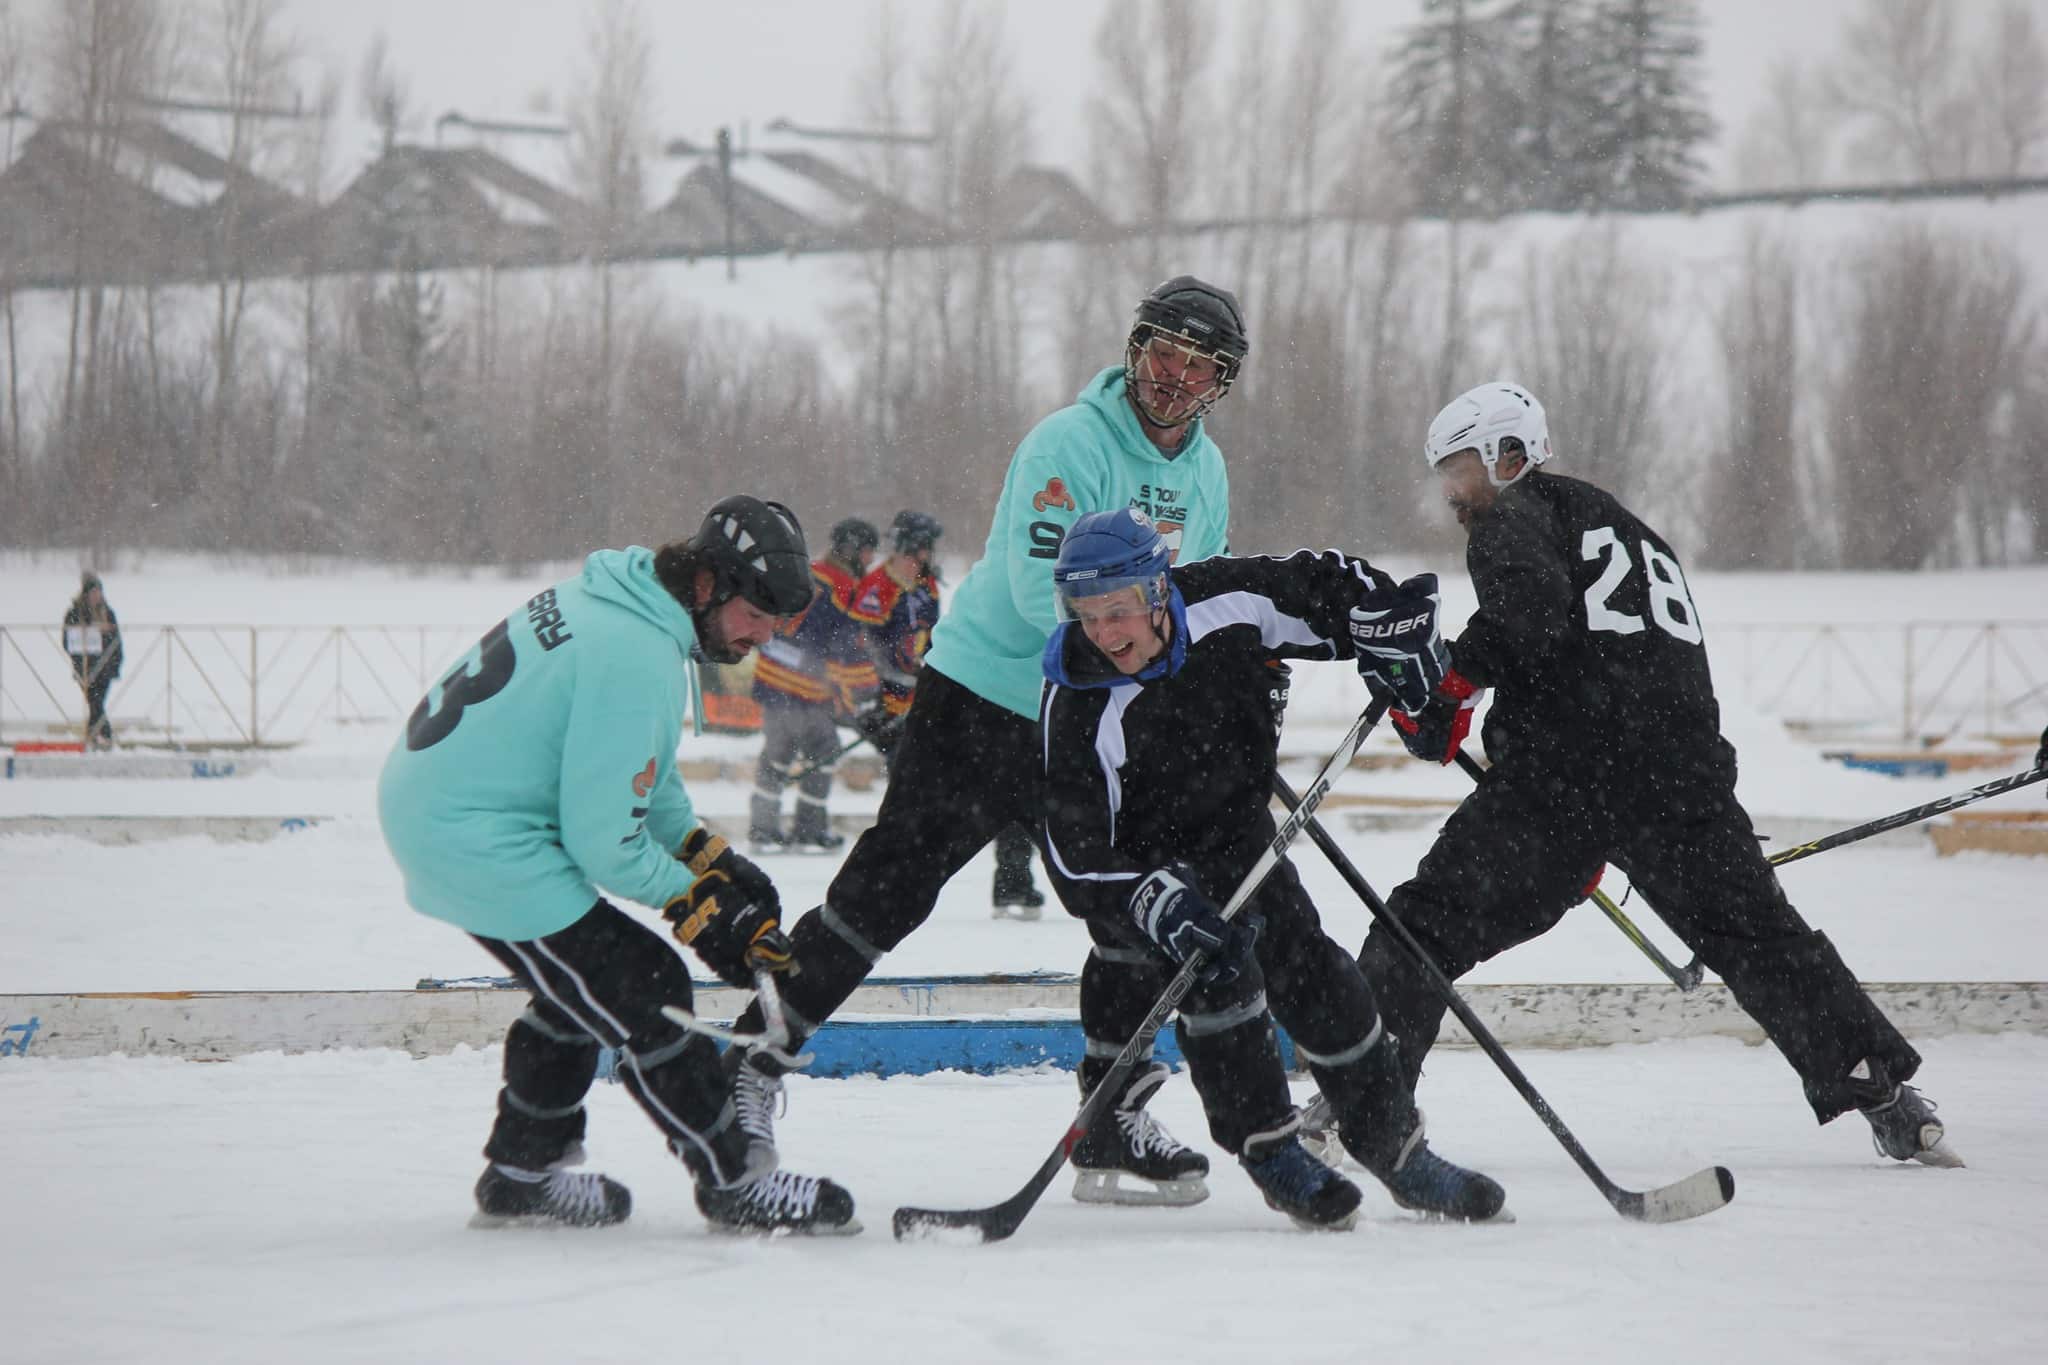 4 people playing ice hockey on a pond